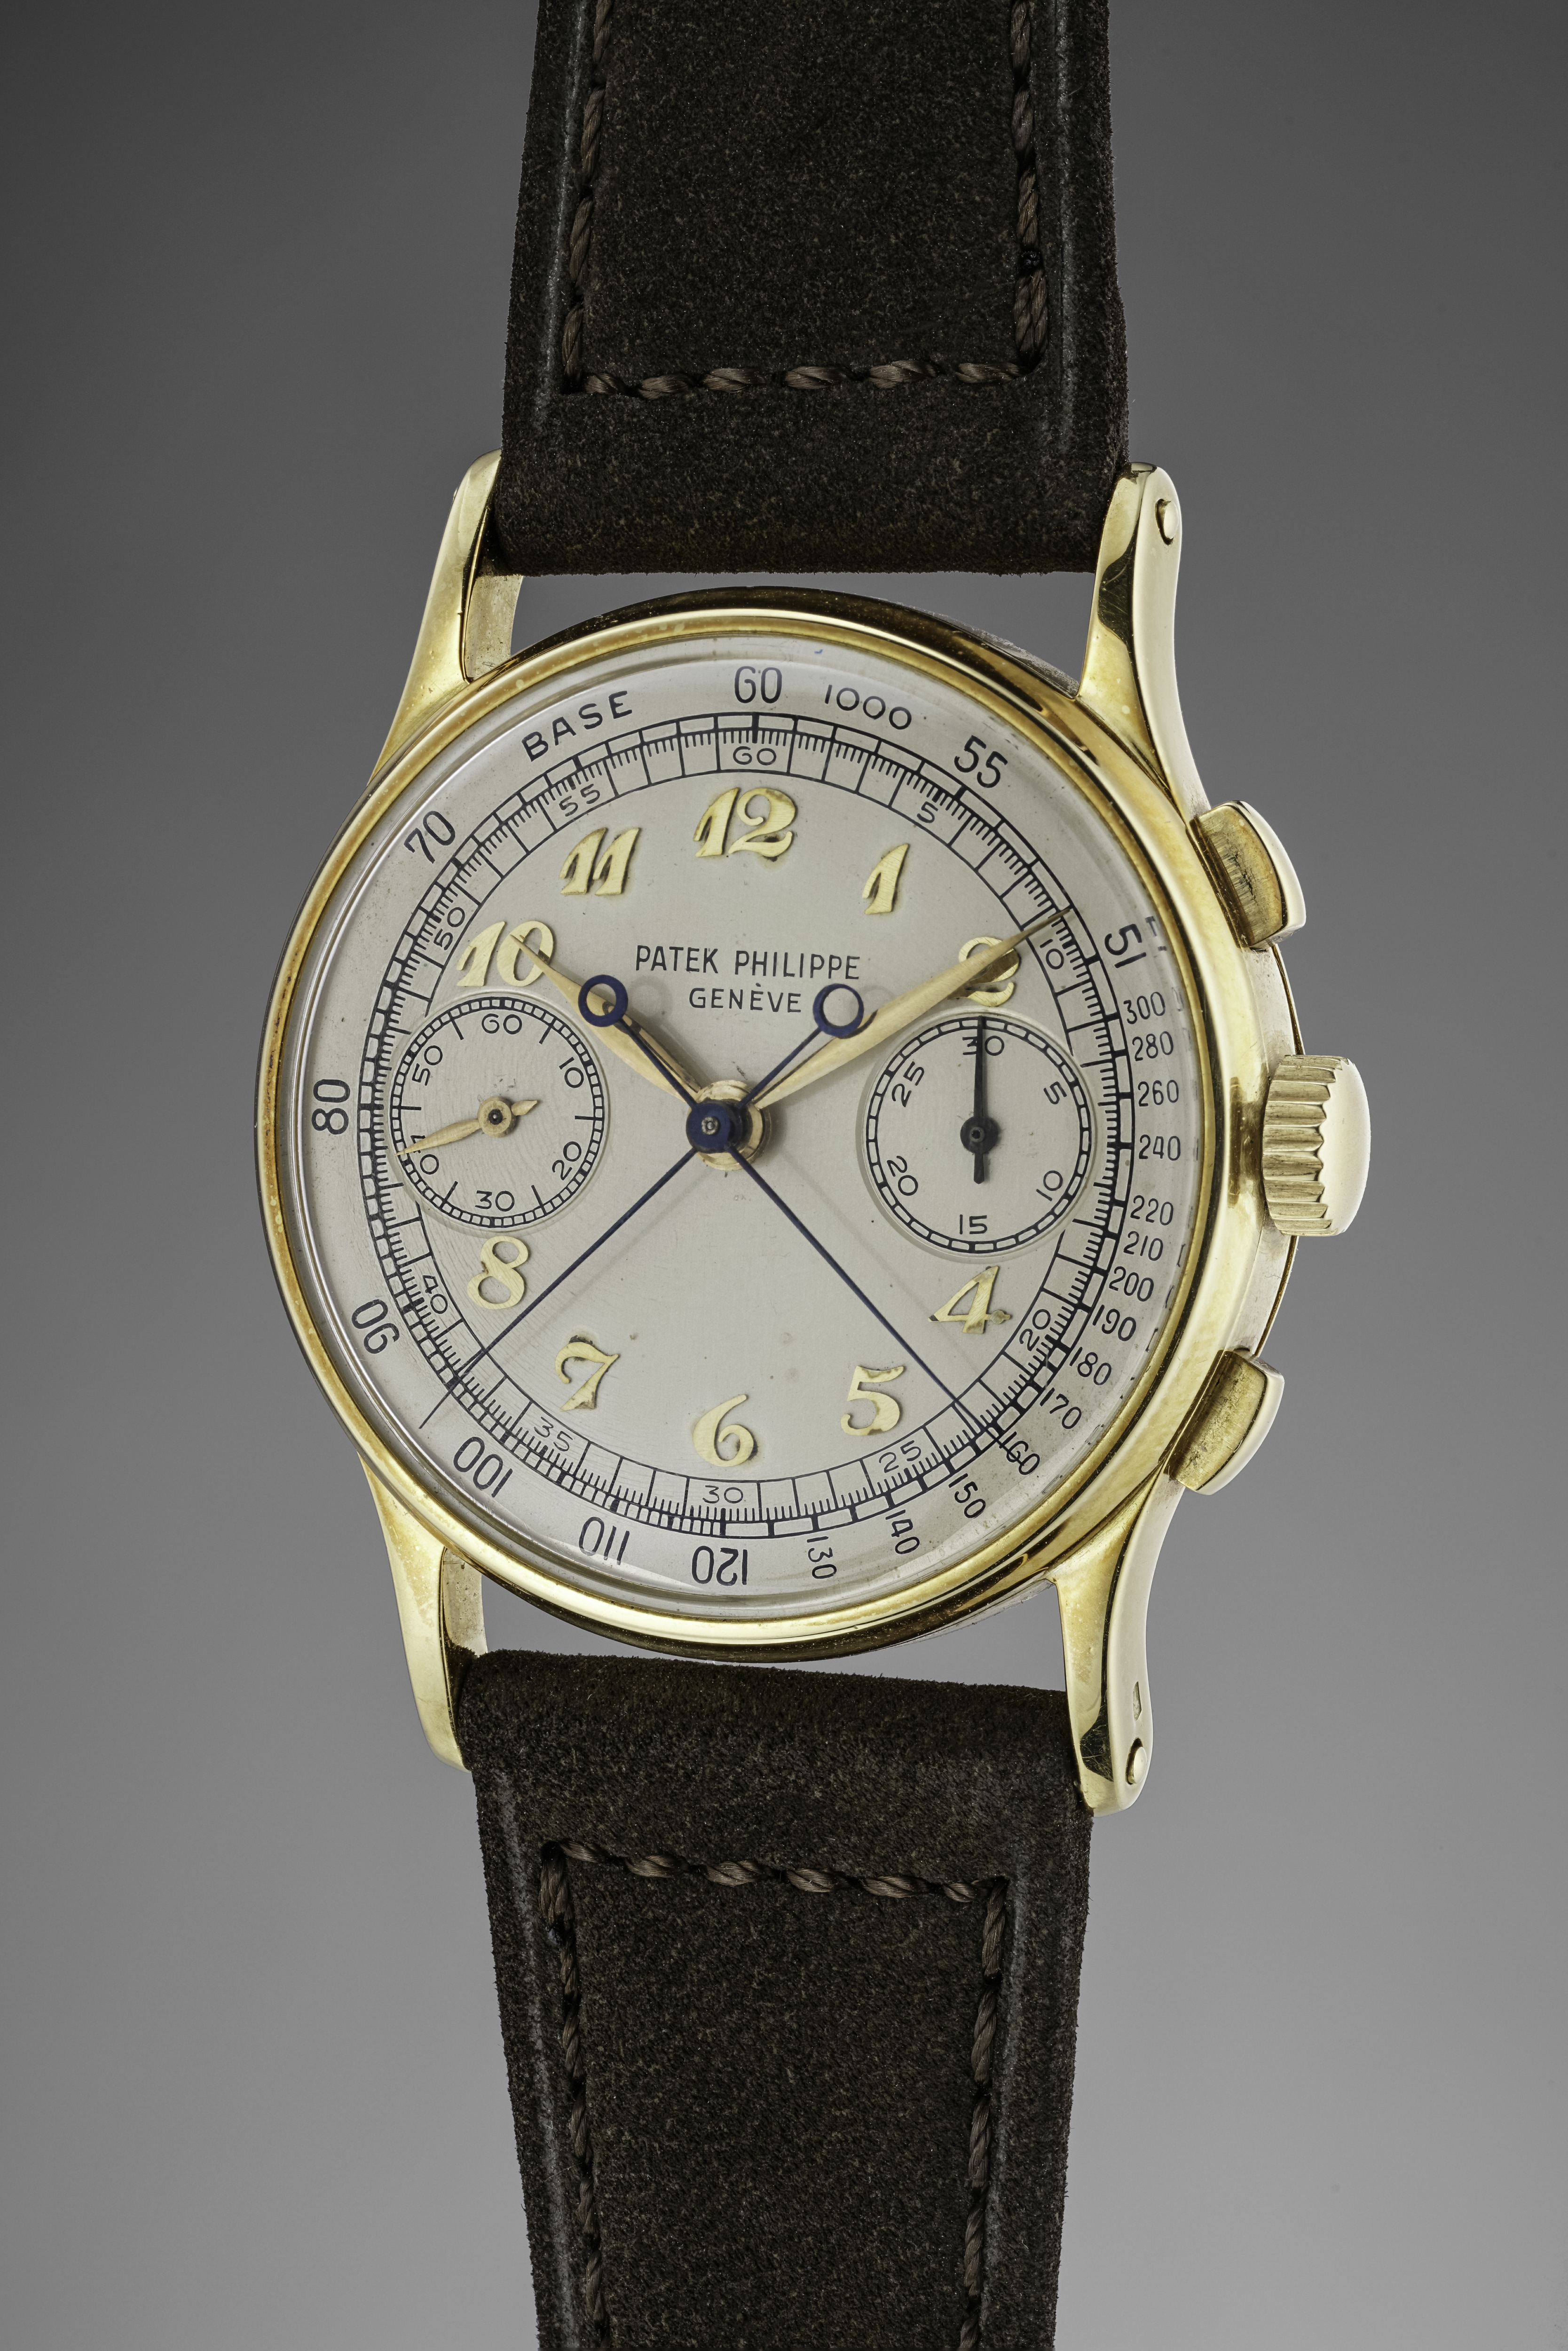 Reference 1436 is the first split seconds chronograph wristwatch that Patek Philippe ever produced in a series. Originally launched in 1938, the model was used as a "tool watch" to time horse or automobile racing, along with scientific experiments. The present watch is not only one of these ultra-limited timepieces but it is only one of 16 known examples in yellow gold to feature applied Breguet numerals and as confirmed in the Patek Philippe Extract from the Archives.